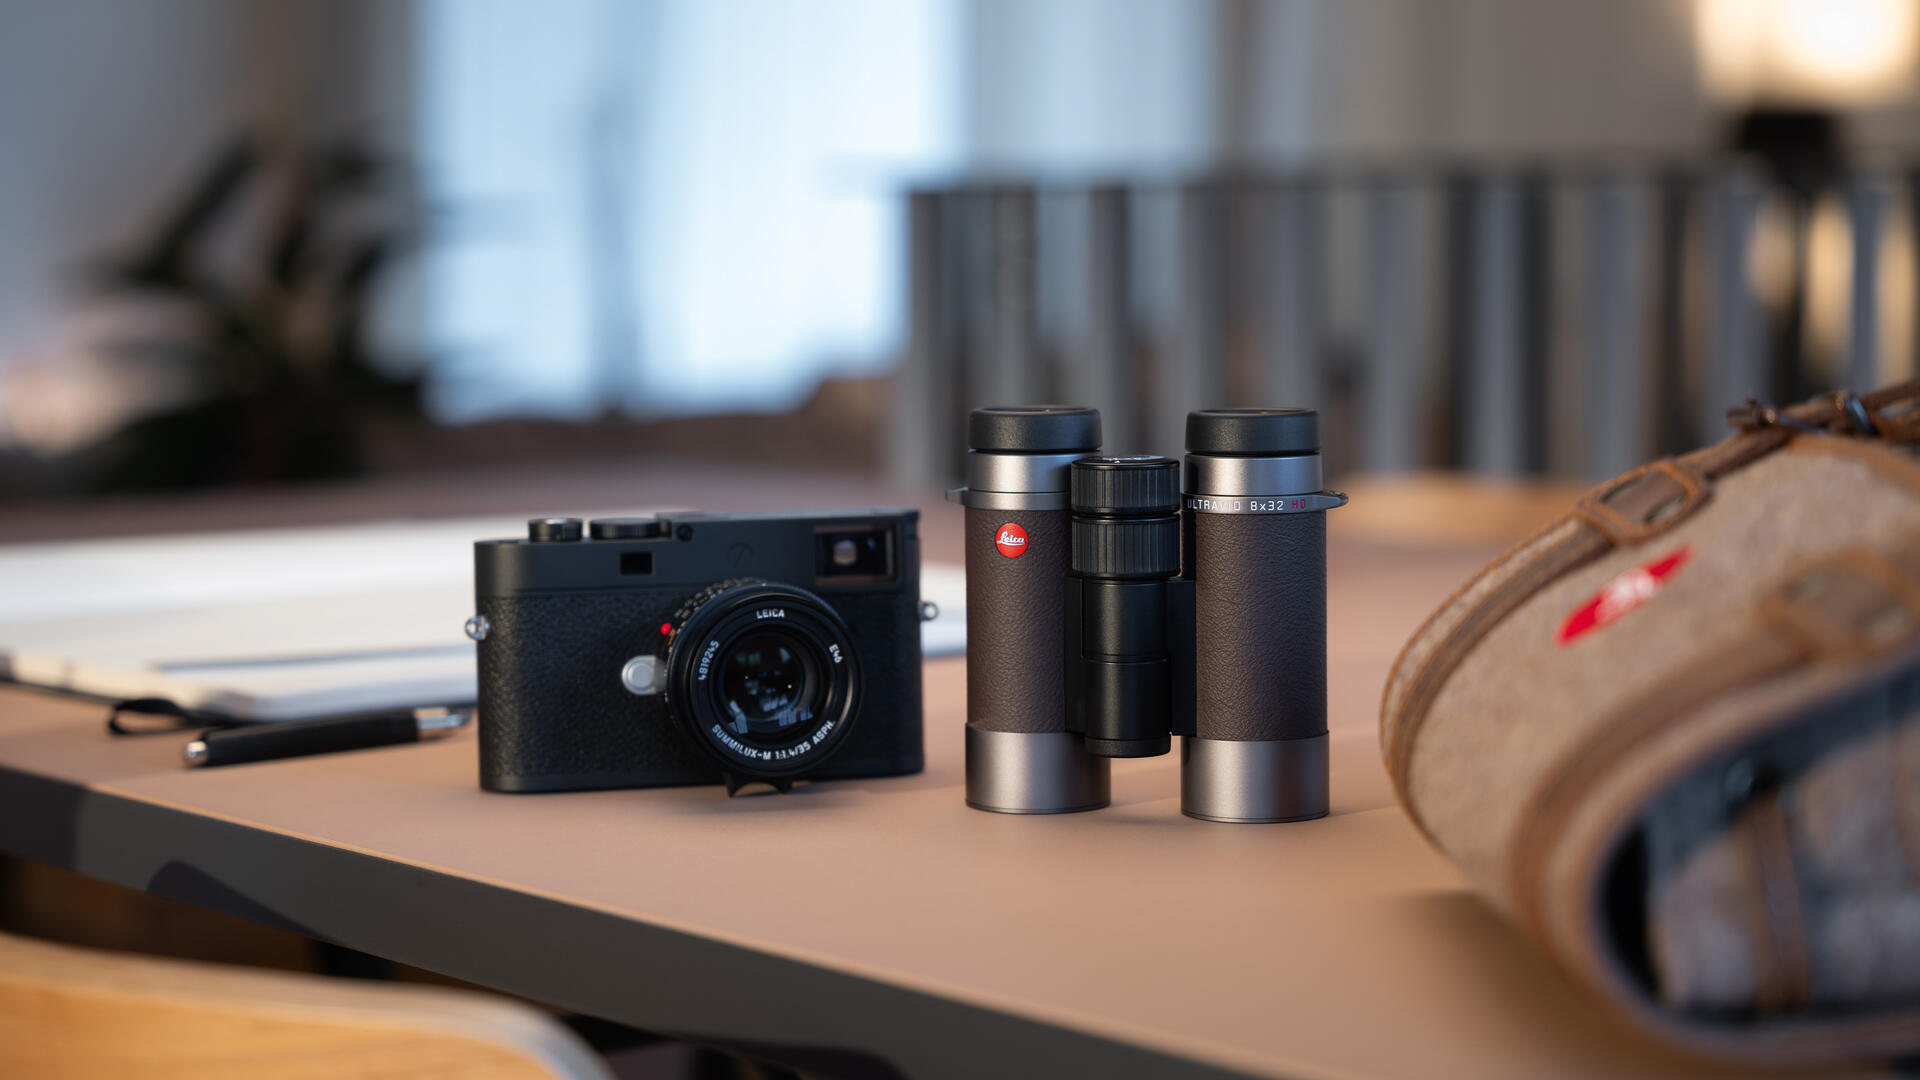 40099_leica-ultravid-8x32-hd-plus-customized-special-edition_hero-content-02